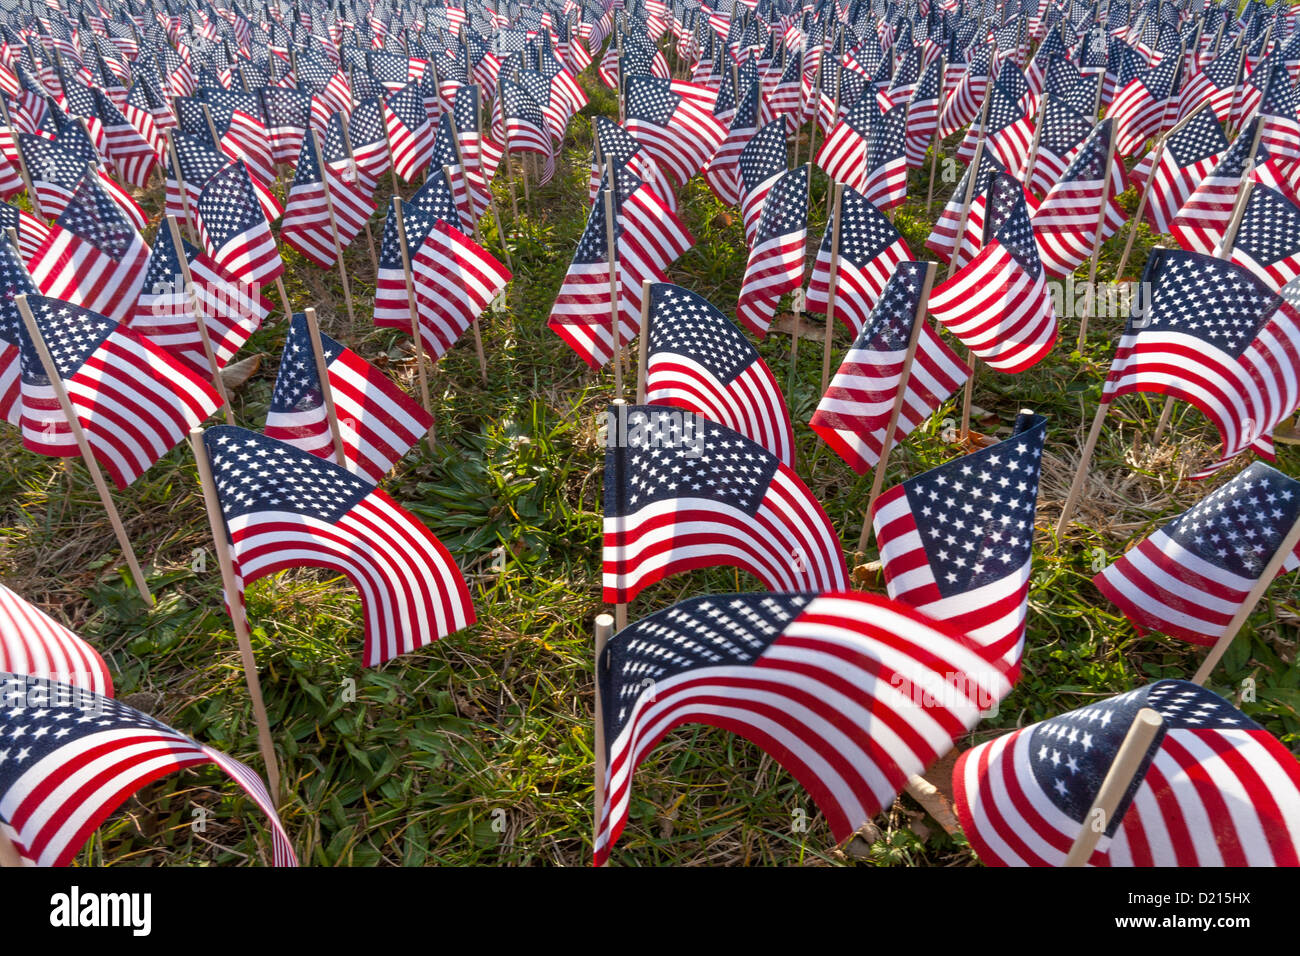 Hundreds of American Flags planted in a field. Stock Photo